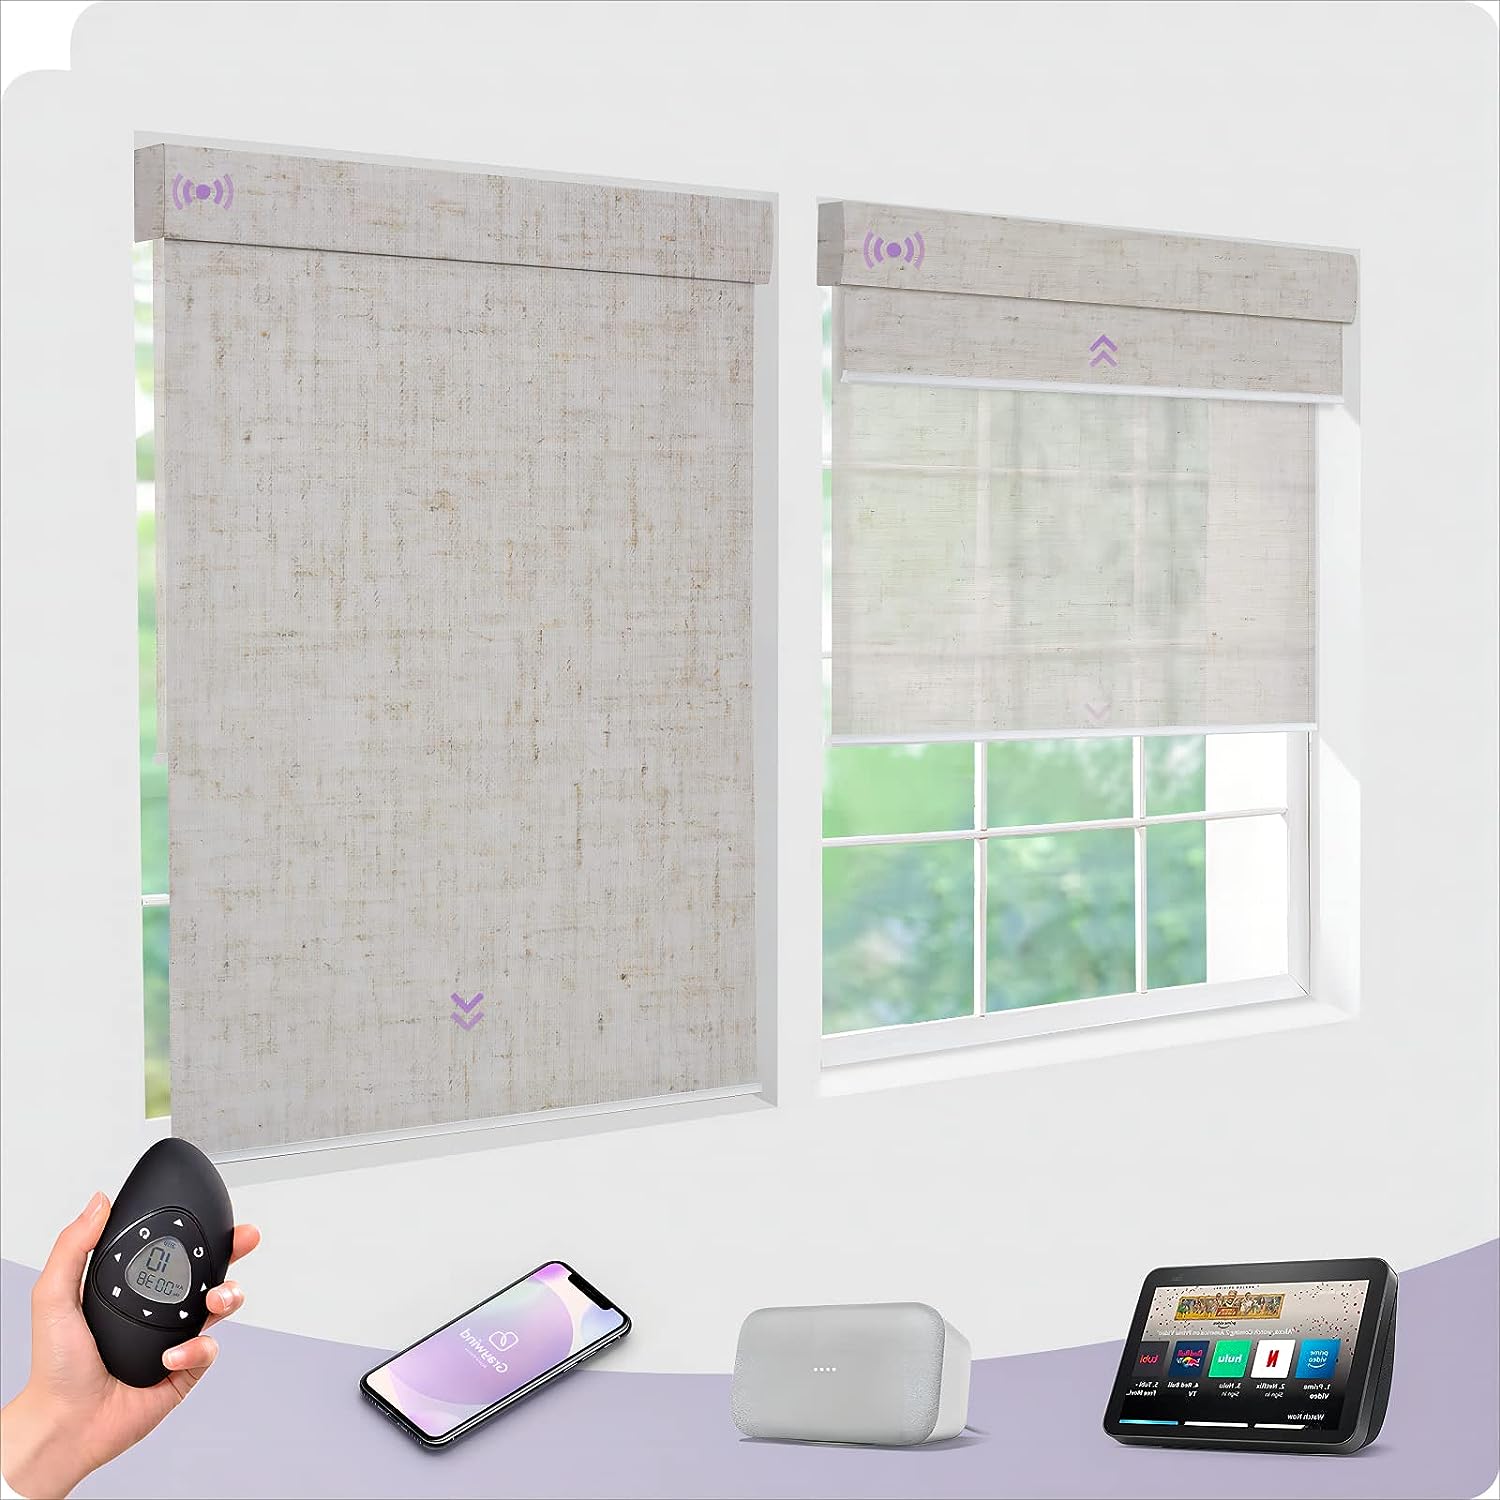 Graywind Motorized Dual Shades for Windows Smart Double Blinds Blackout and Light Filtering Motorized Blinds with Remote Alexa Google Control Day Night Shades, Custom Size (Blackout Light Grey)Product name: Graywind Motorized Dual Shades